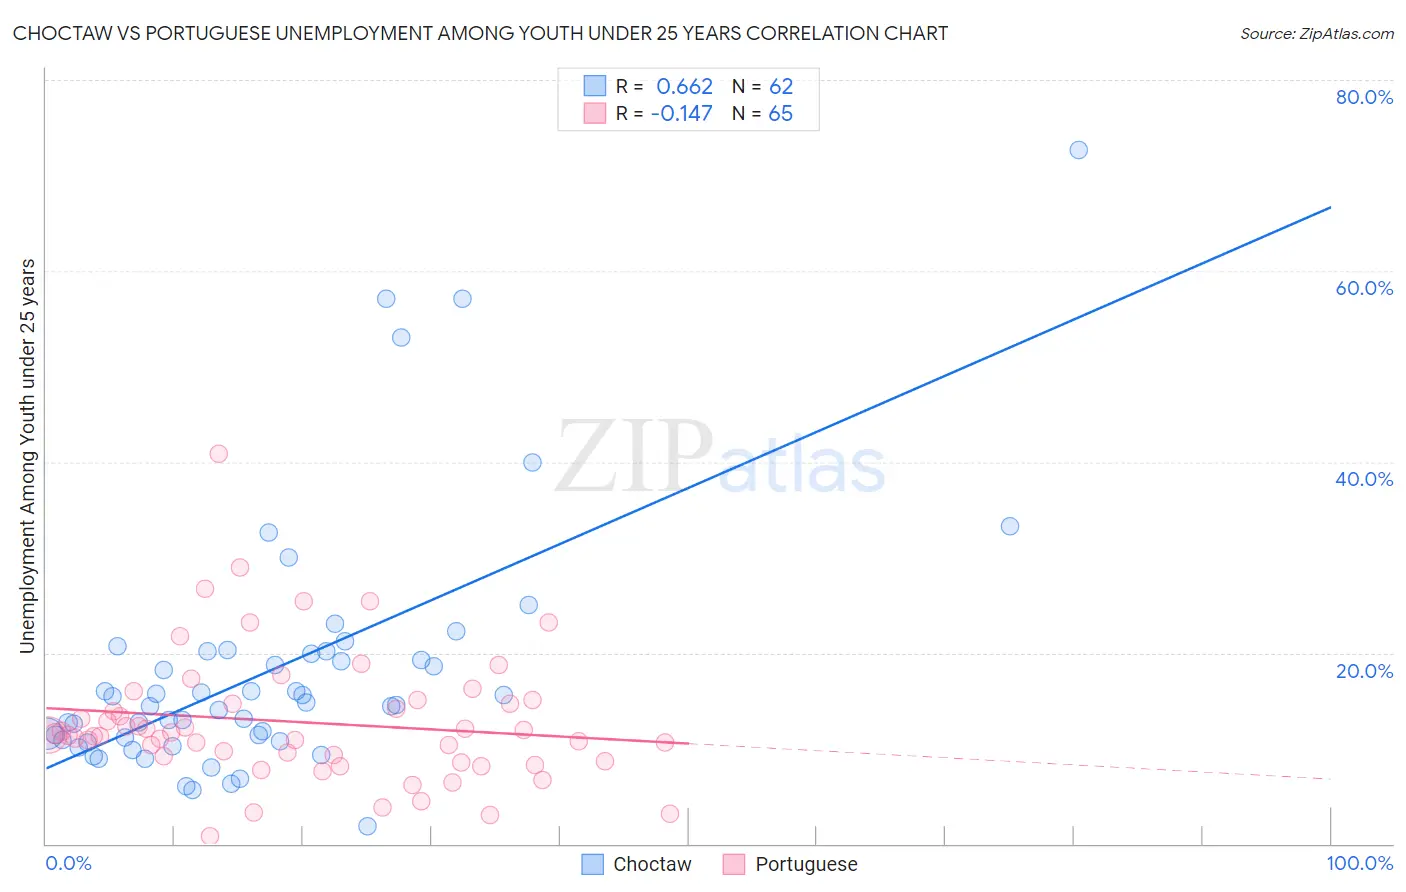 Choctaw vs Portuguese Unemployment Among Youth under 25 years